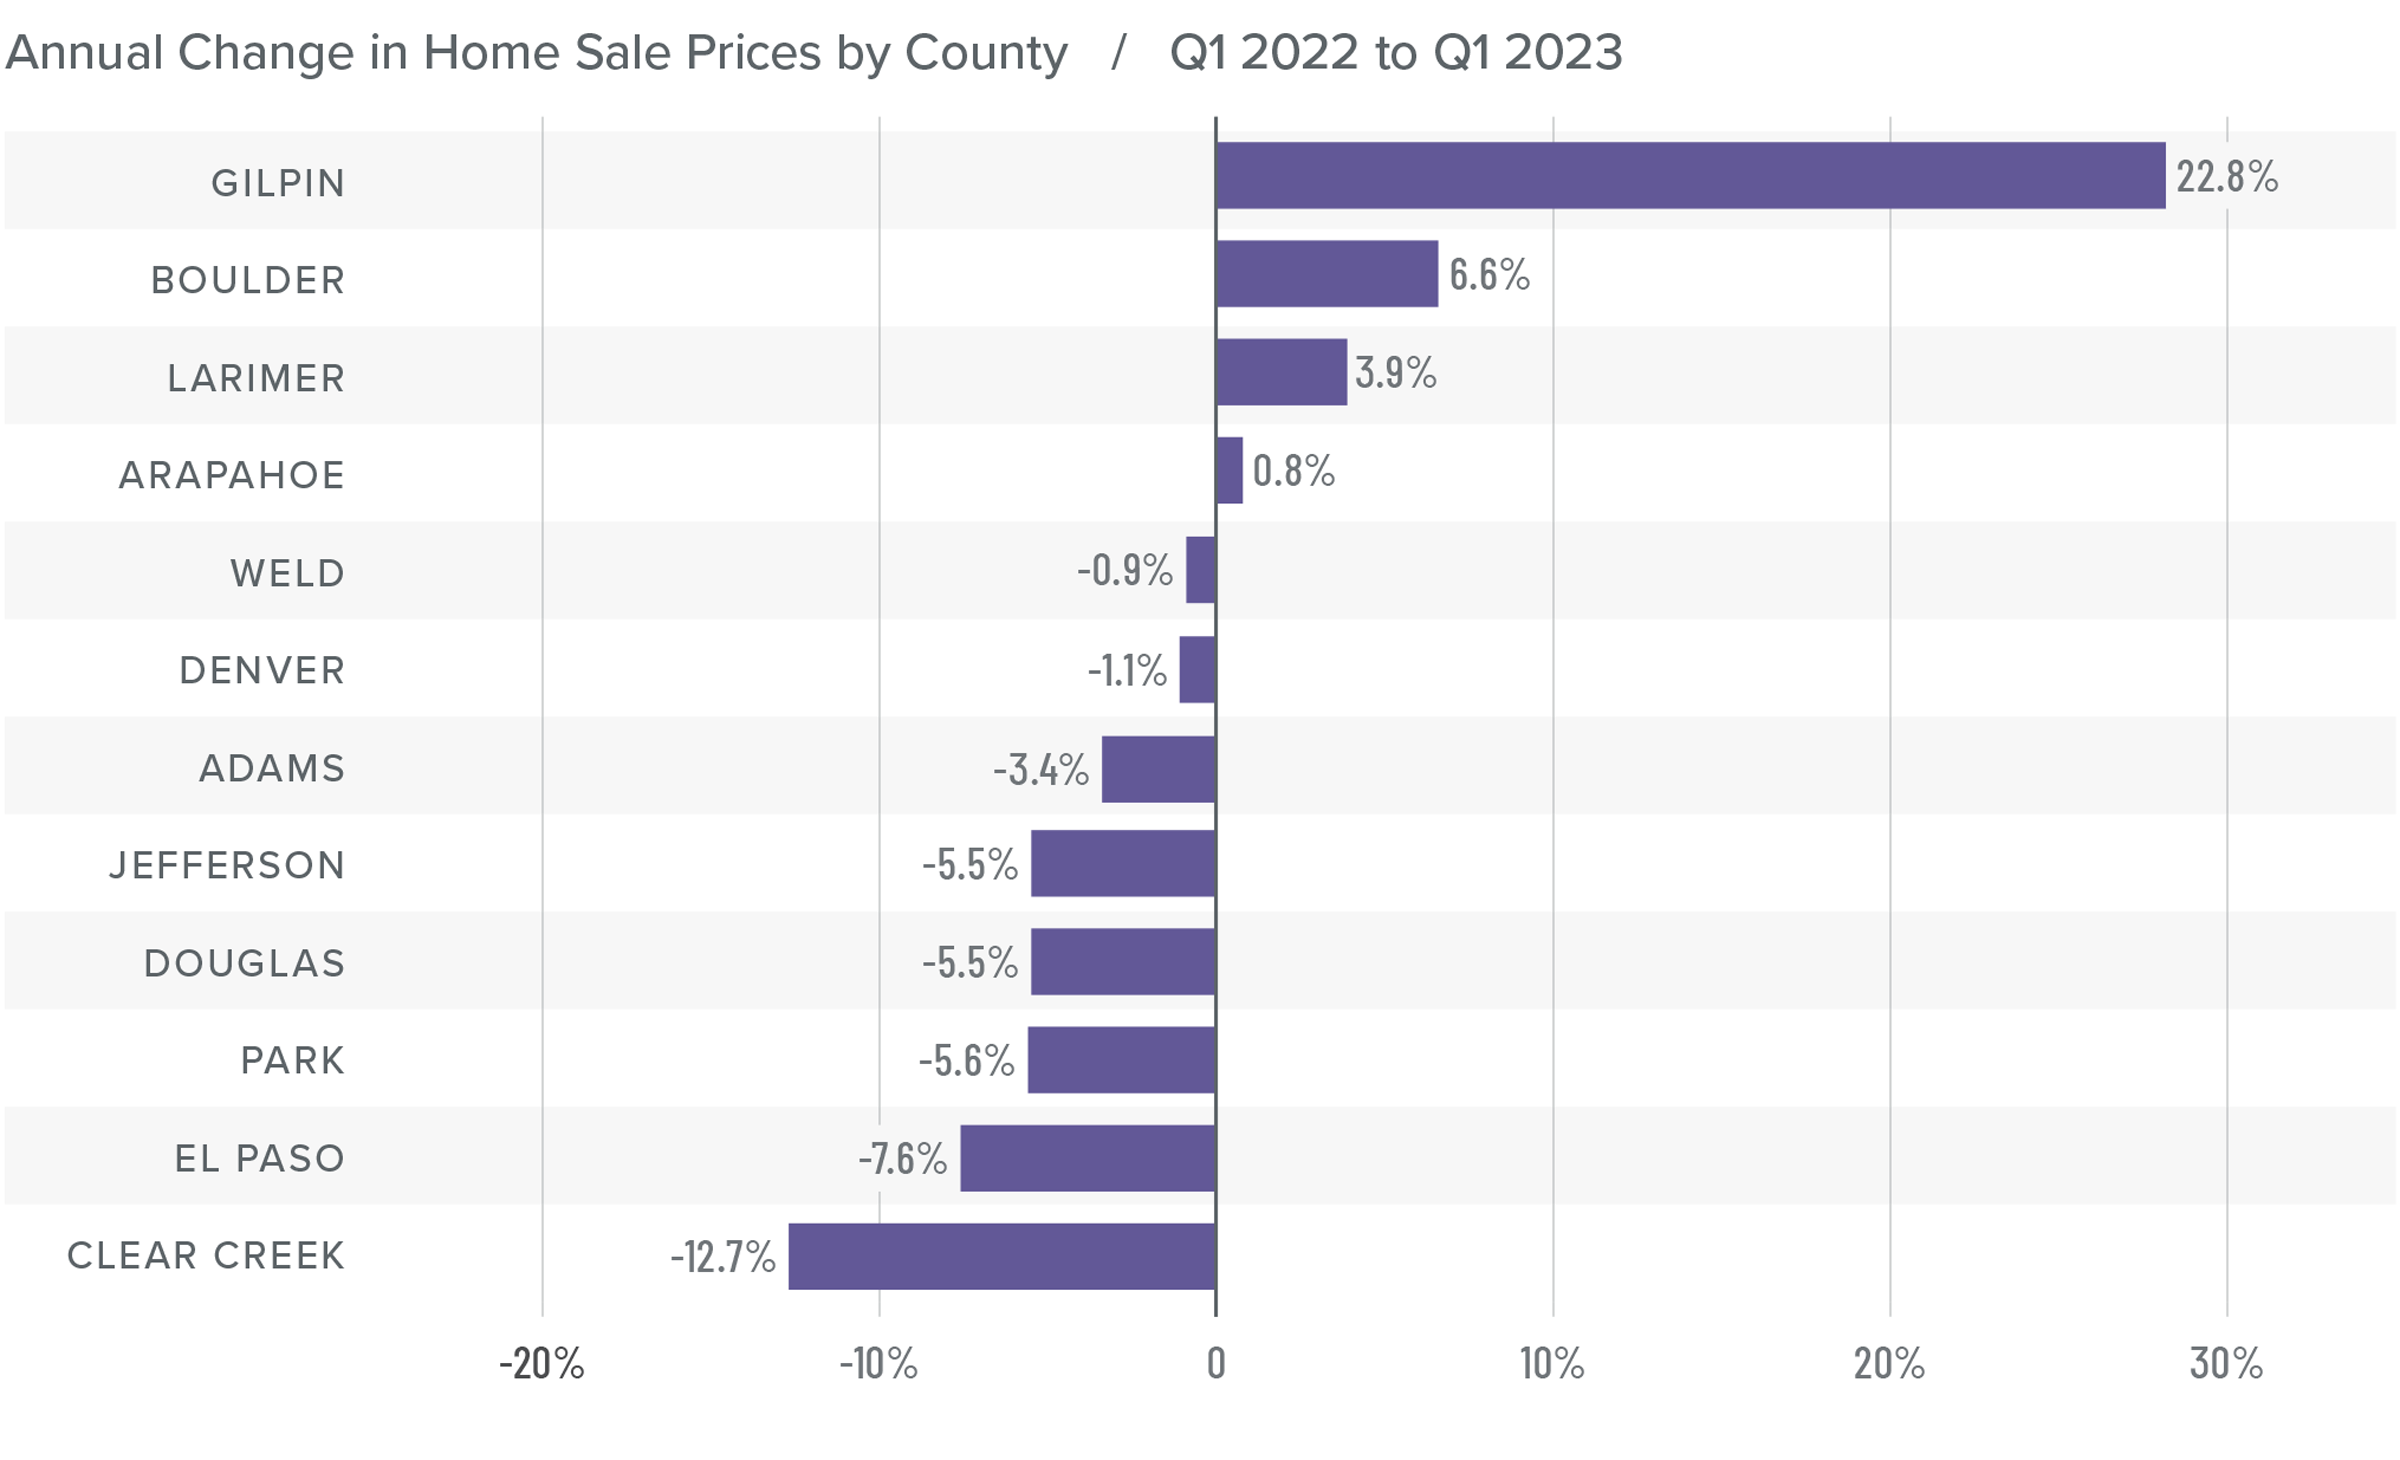 A bar graph showing the annual change in home sale prices for various counties in Colorado from Q1 2022 to Q1 2023. Most counties have a negative percentage year-over-year change. Here are the totals: Gilpin at 22.8%, Boulder at 6.6%, Larimer 3.9%, Arapahoe 0.8%, Weld -0.9%, Denver -1.1%, Adams -3.4%, Jefferson and Douglas - 5.5%, Park -5.6%, El Paso -7.6%, and Clear Creek -12.7%.